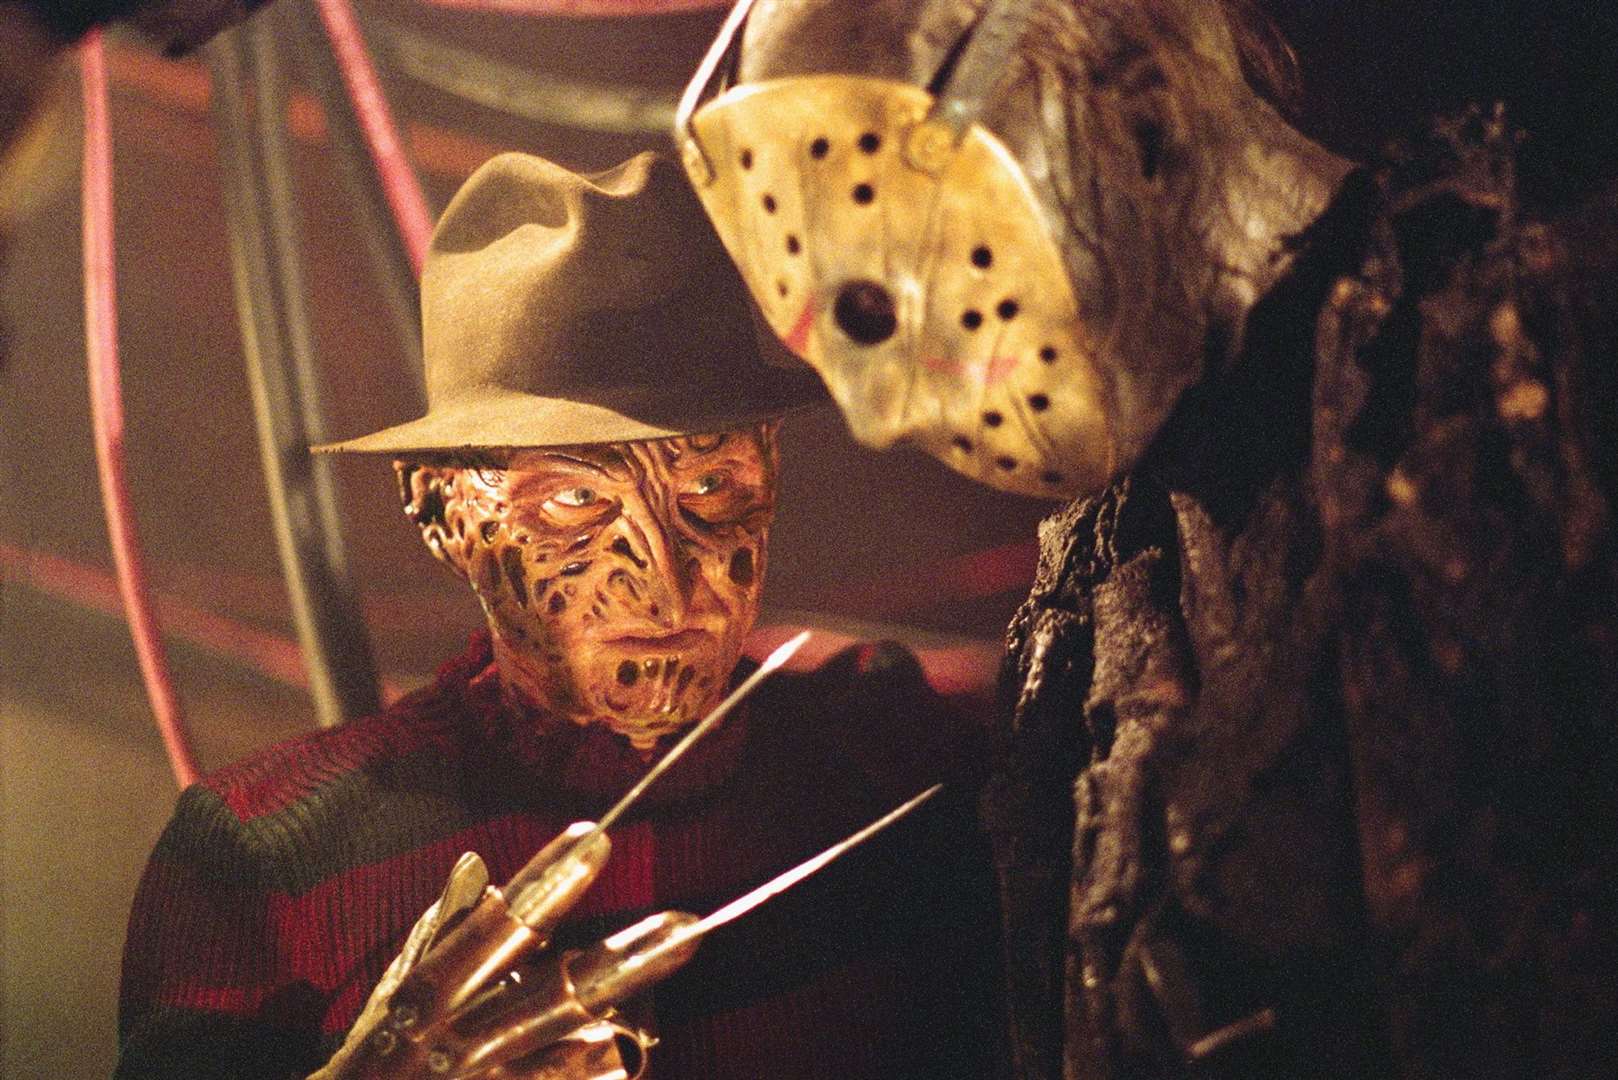 Freddy Krueger Picture: James Dittiger/New Line Productions/Entertainment Films